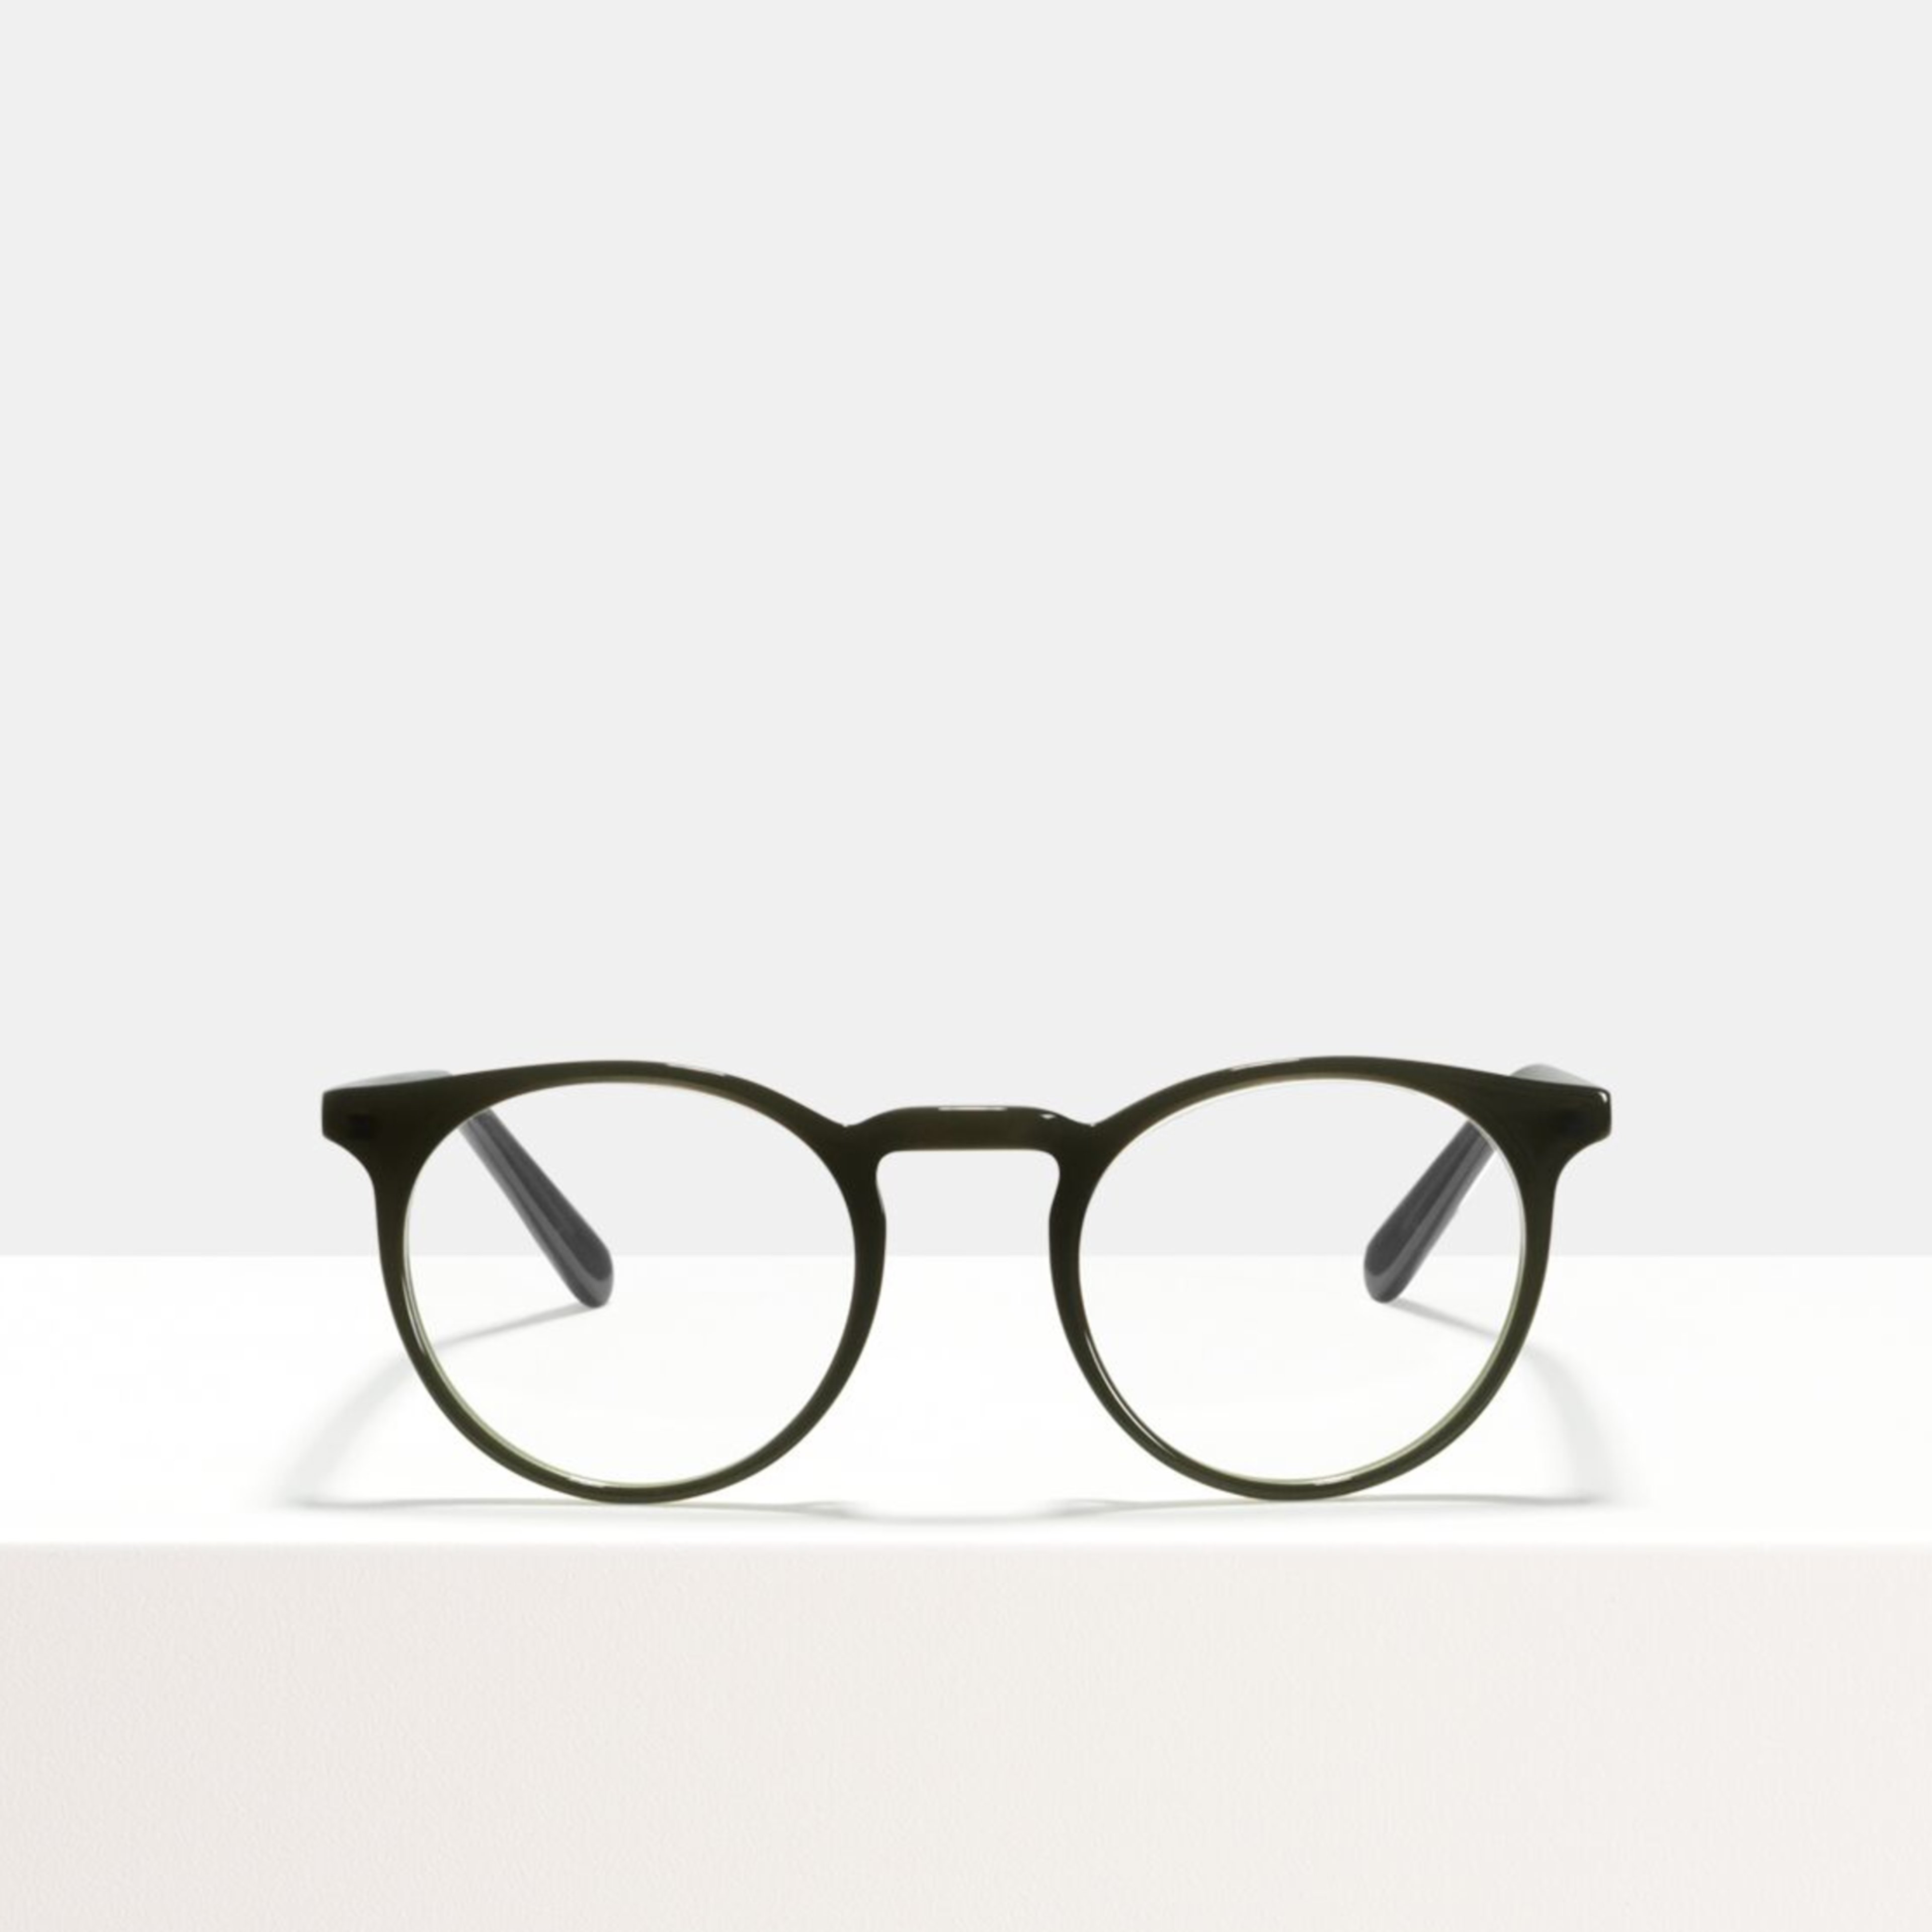 Ace & Tate Glasses | round acetate in Green, Grey